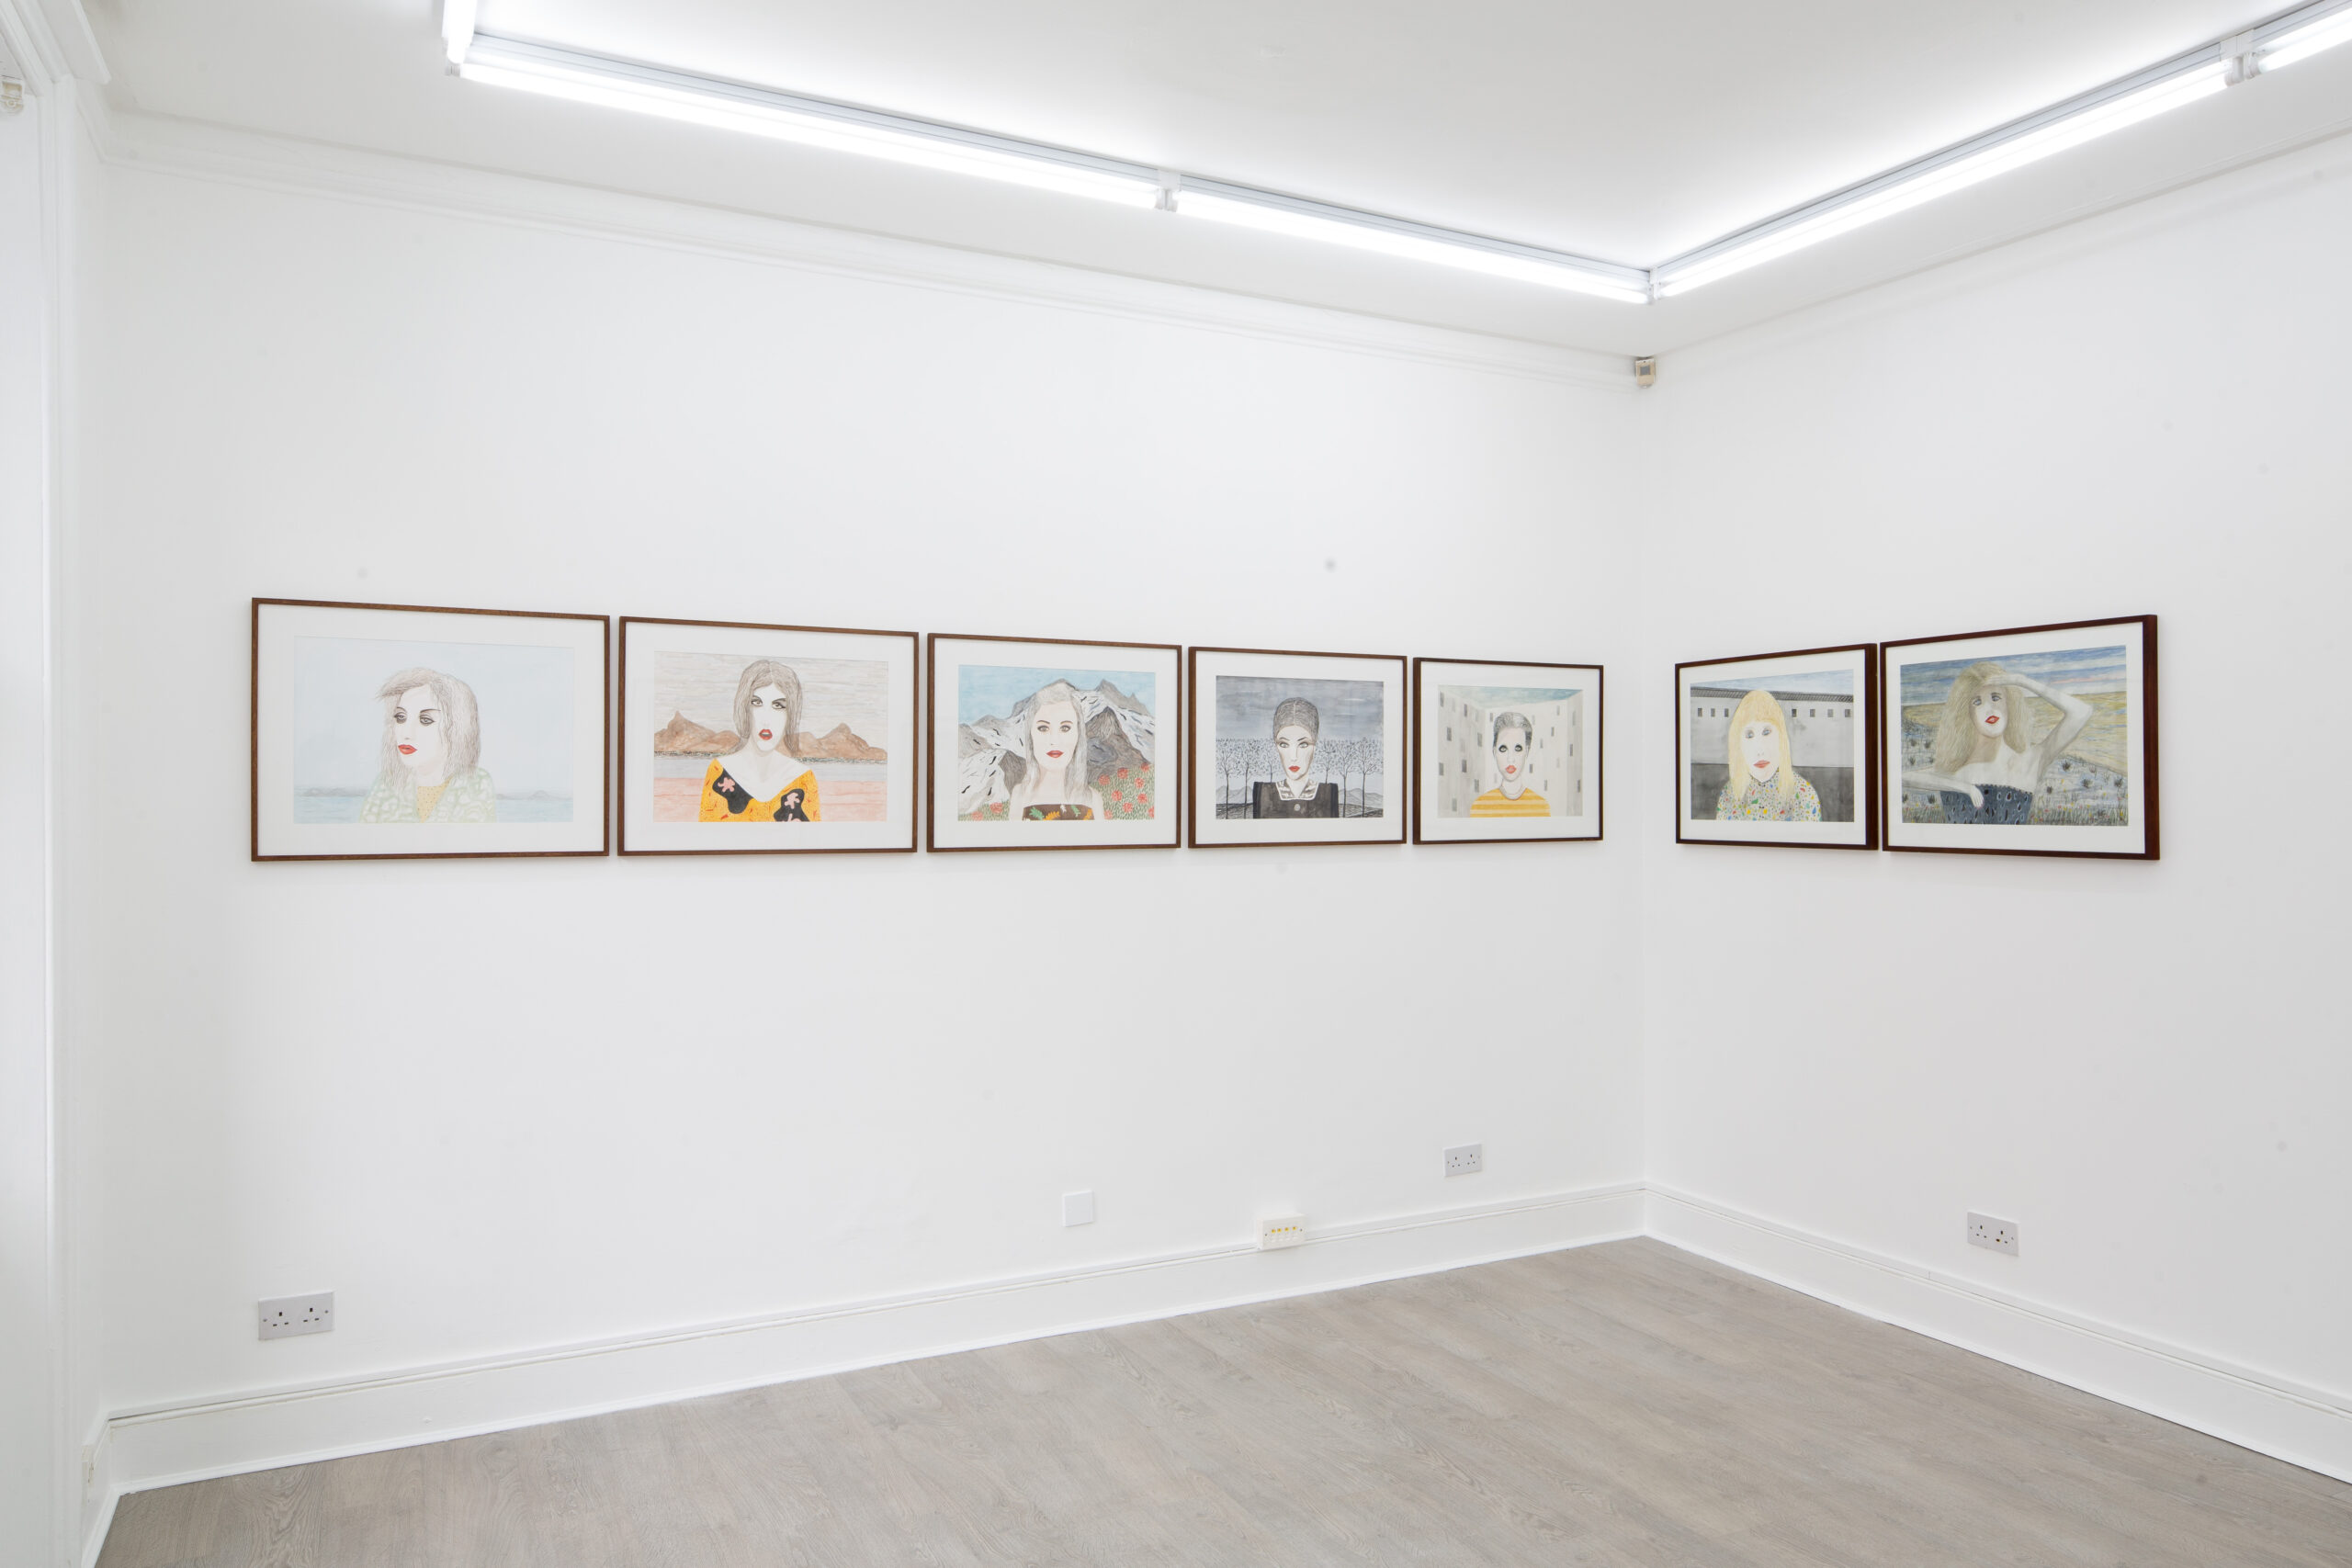 Brian Dawn Chalkley The Pictorial Space of Poetic Horror at Lungley Gallery